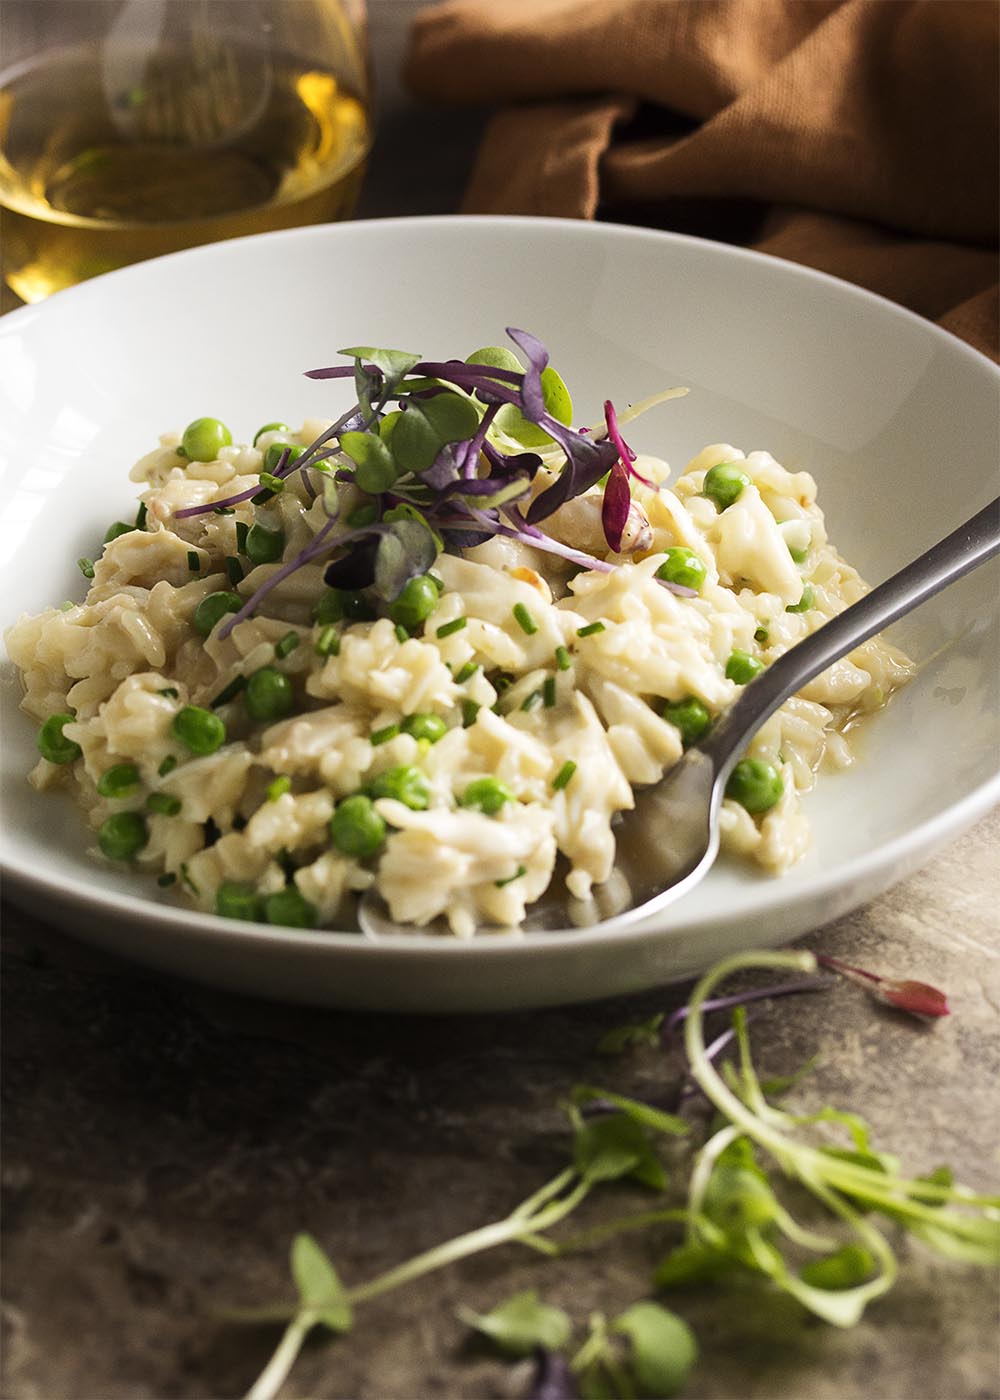 Creamy crab risotto makes a great one-pot meal! Sweet crab meat is mixed with mascarpone and baby peas in this quick dinner. Great for a weeknight or for date night. | justalittlebitofbacon.com